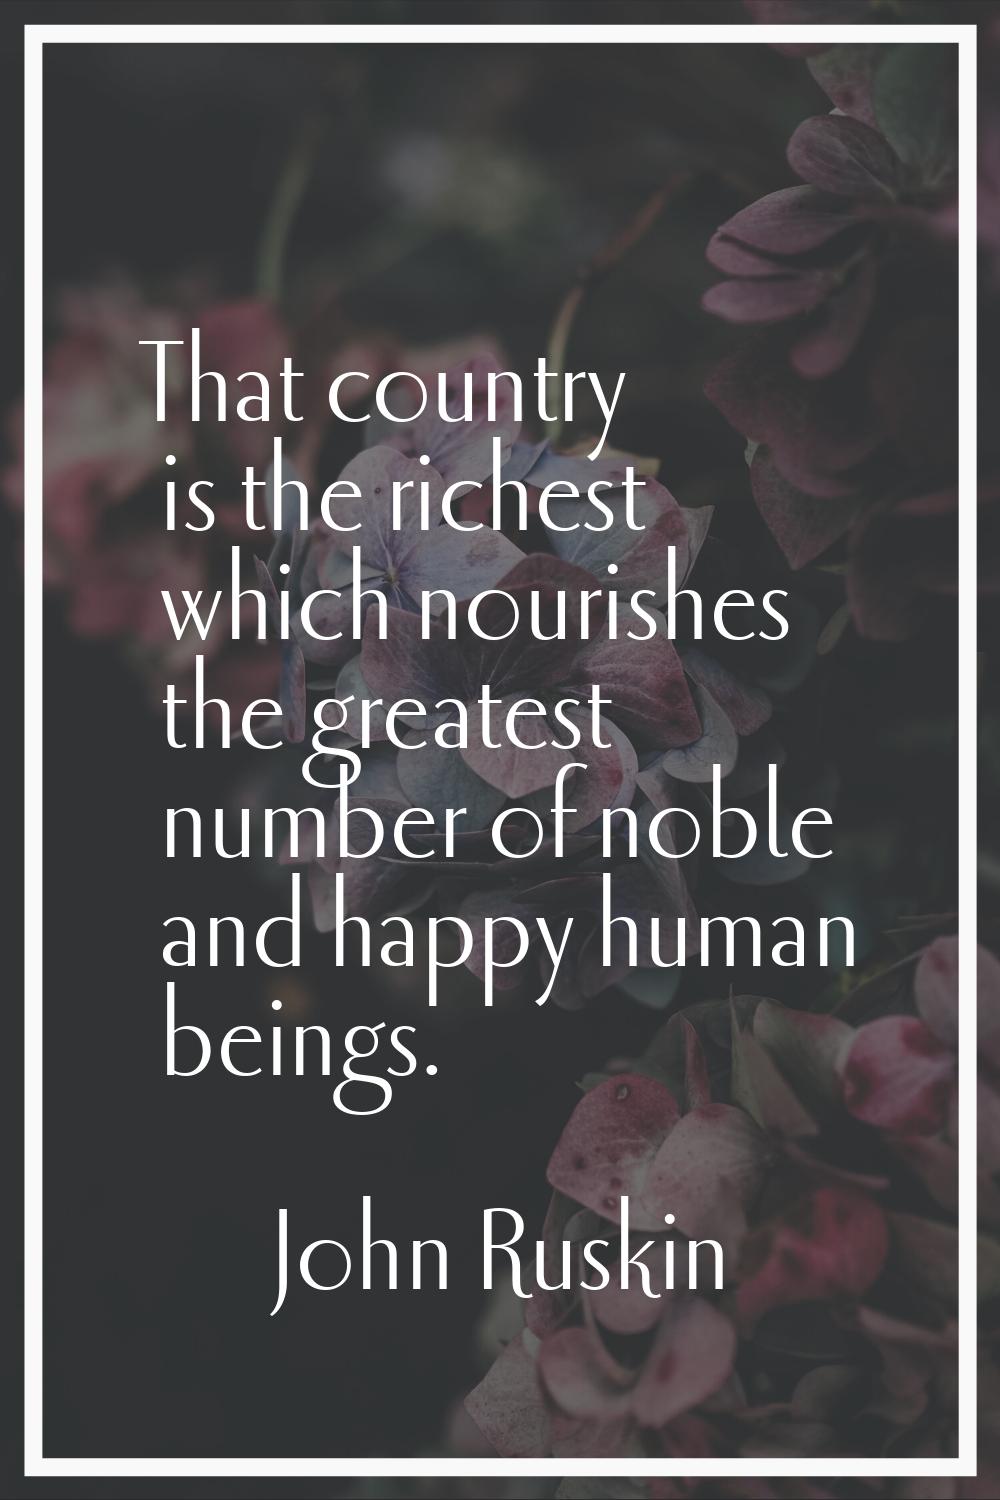 That country is the richest which nourishes the greatest number of noble and happy human beings.